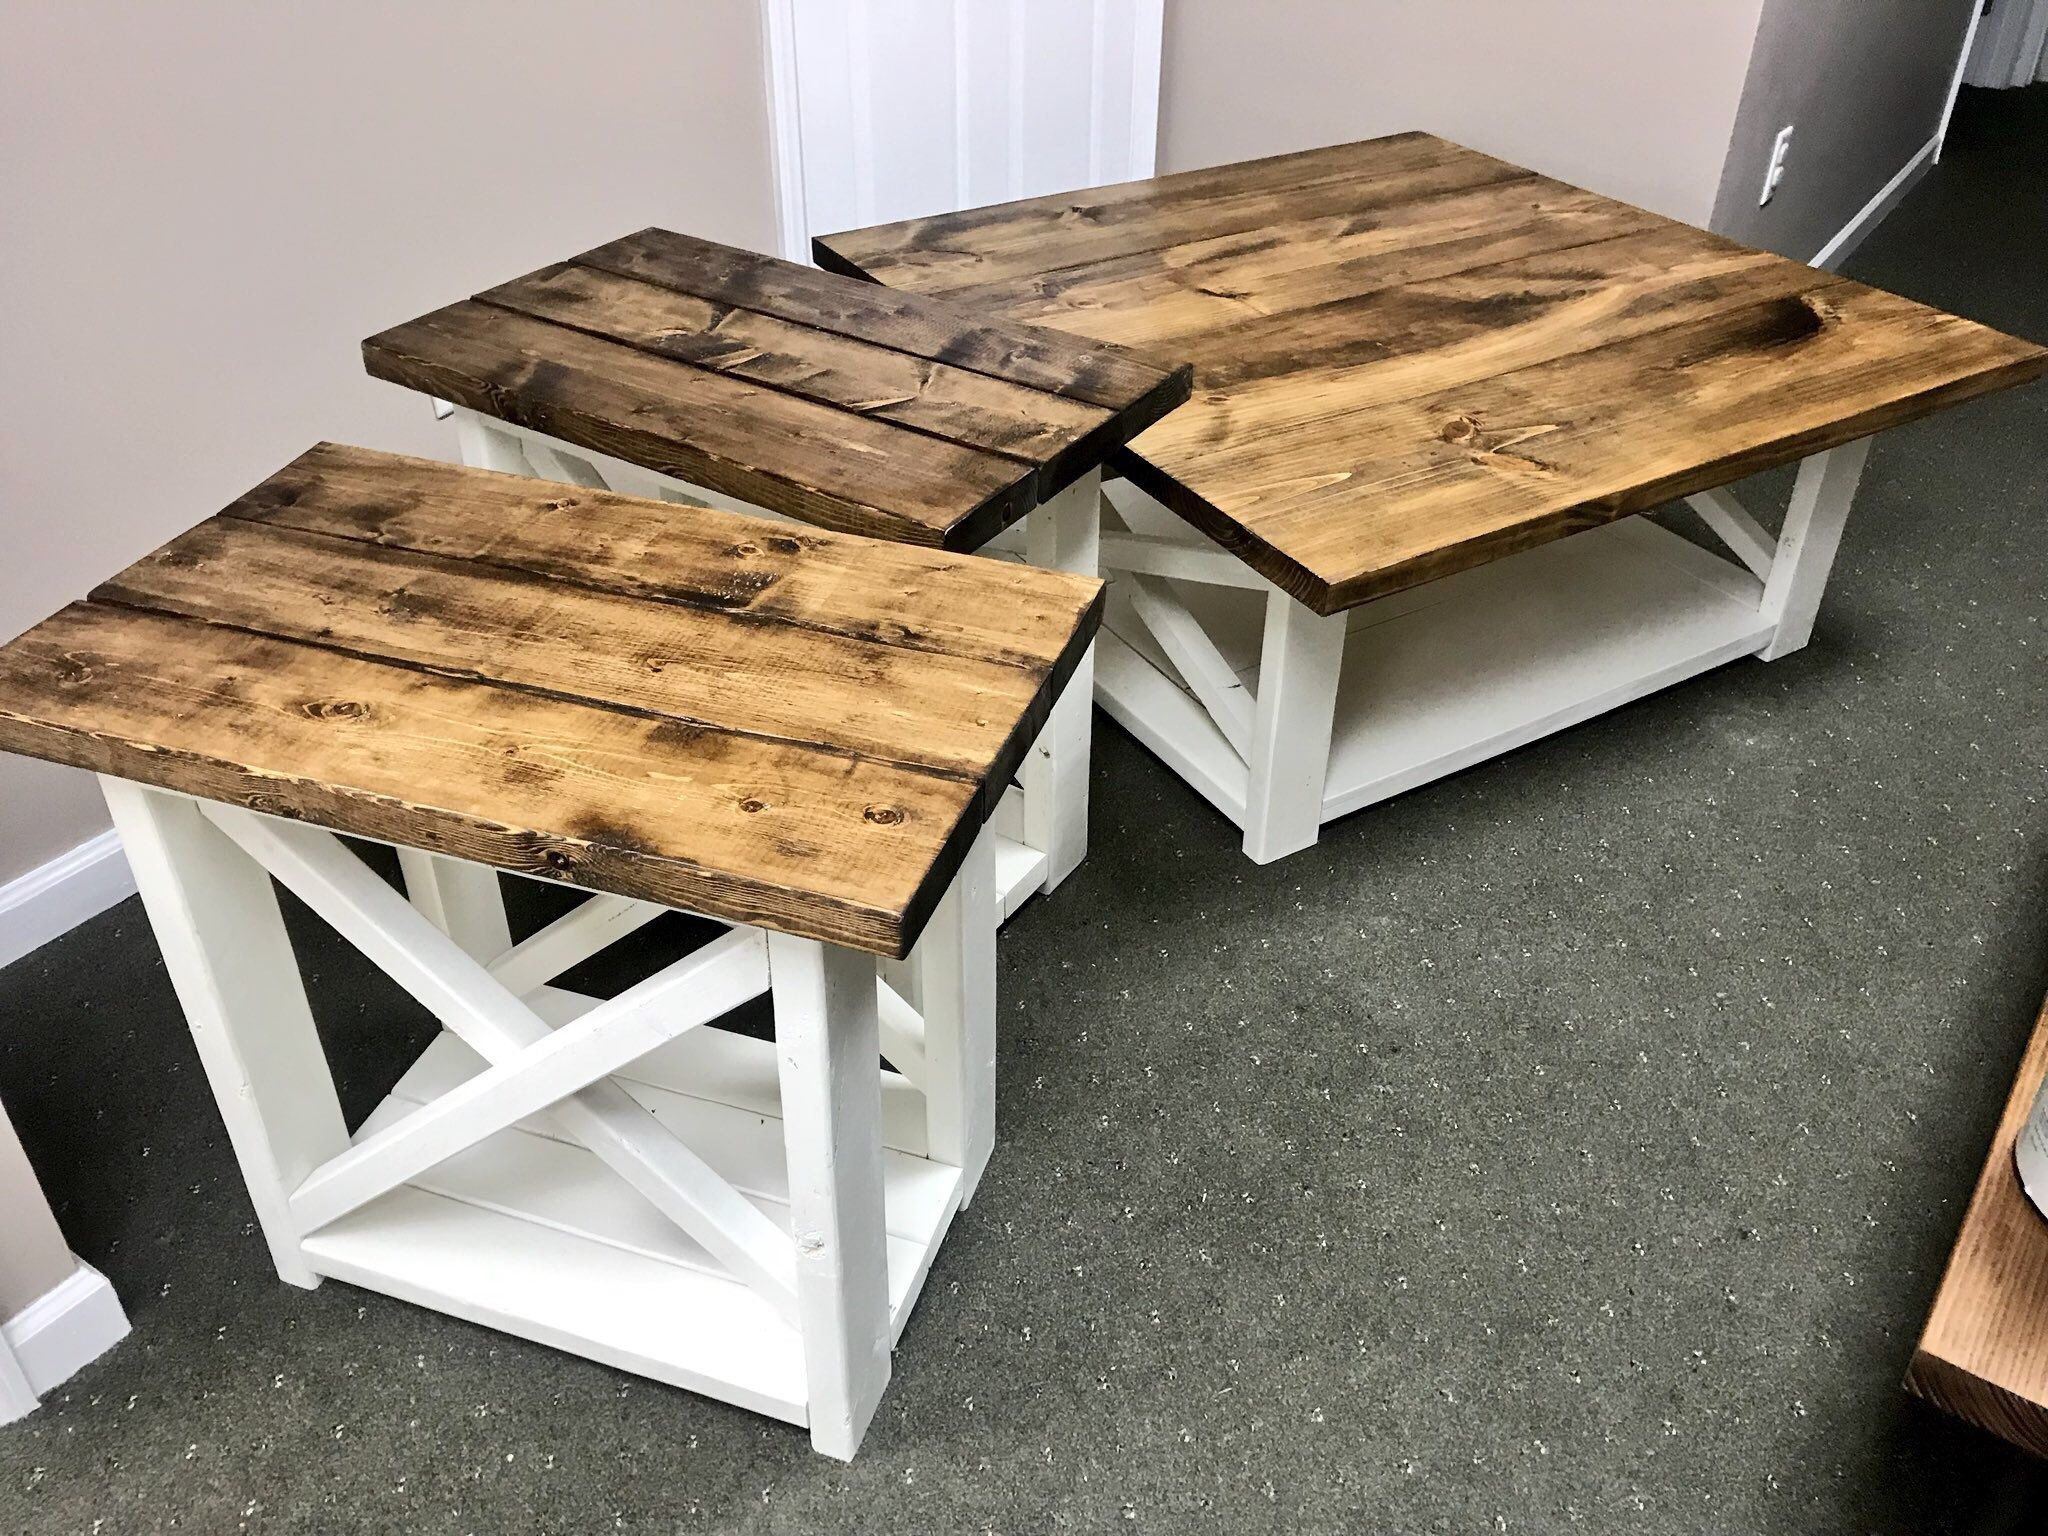 Rustic Living Room Set, Large Farmhouse Coffee Table With Set Of Long With Regard To Living Room Farmhouse Coffee Tables (View 8 of 15)